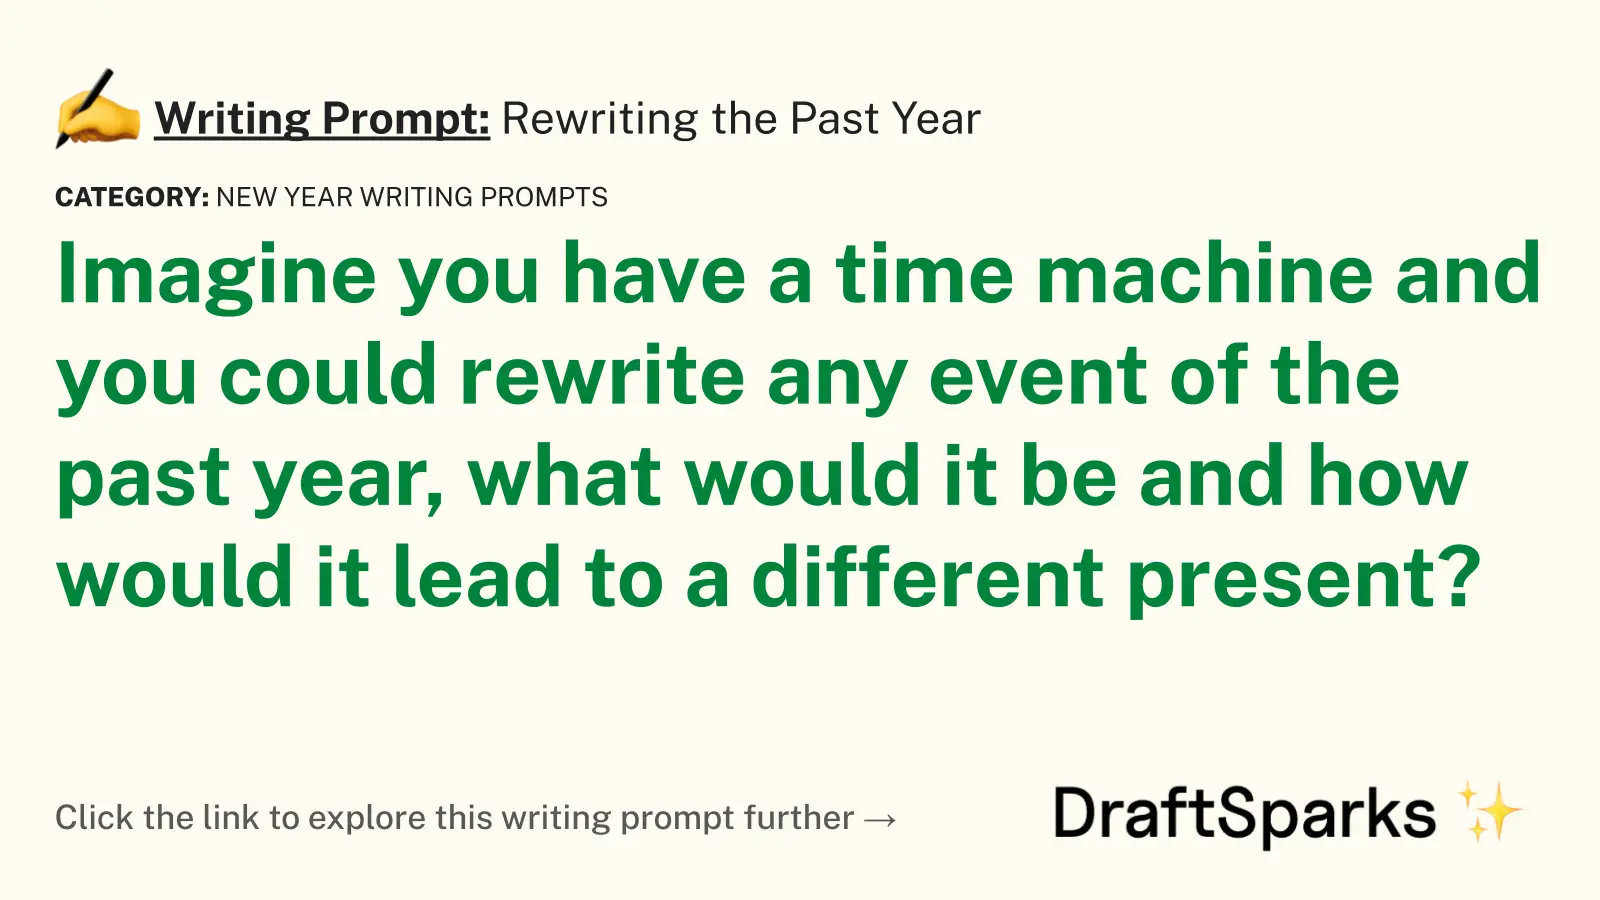 Rewriting the Past Year